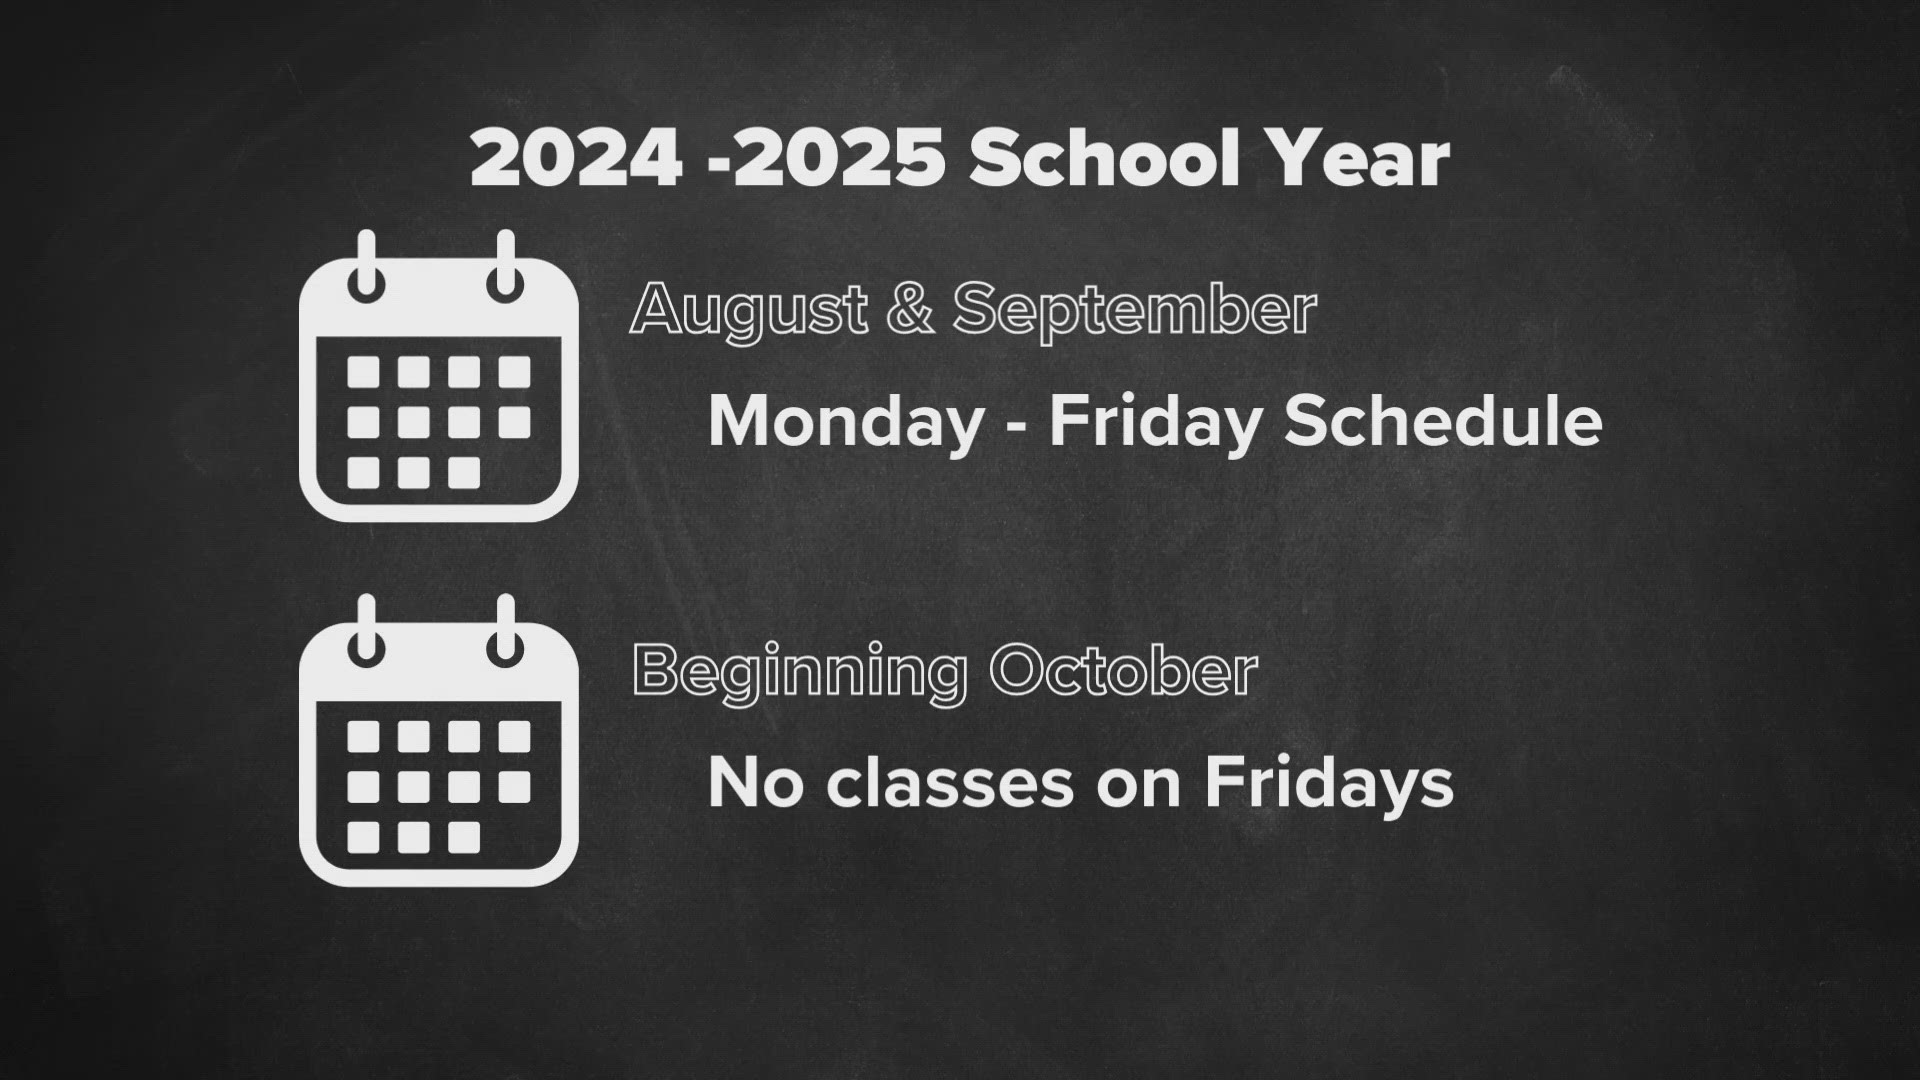 Sanger ISD is pivoting to a 4-day school week to make up for its lack of staffing.